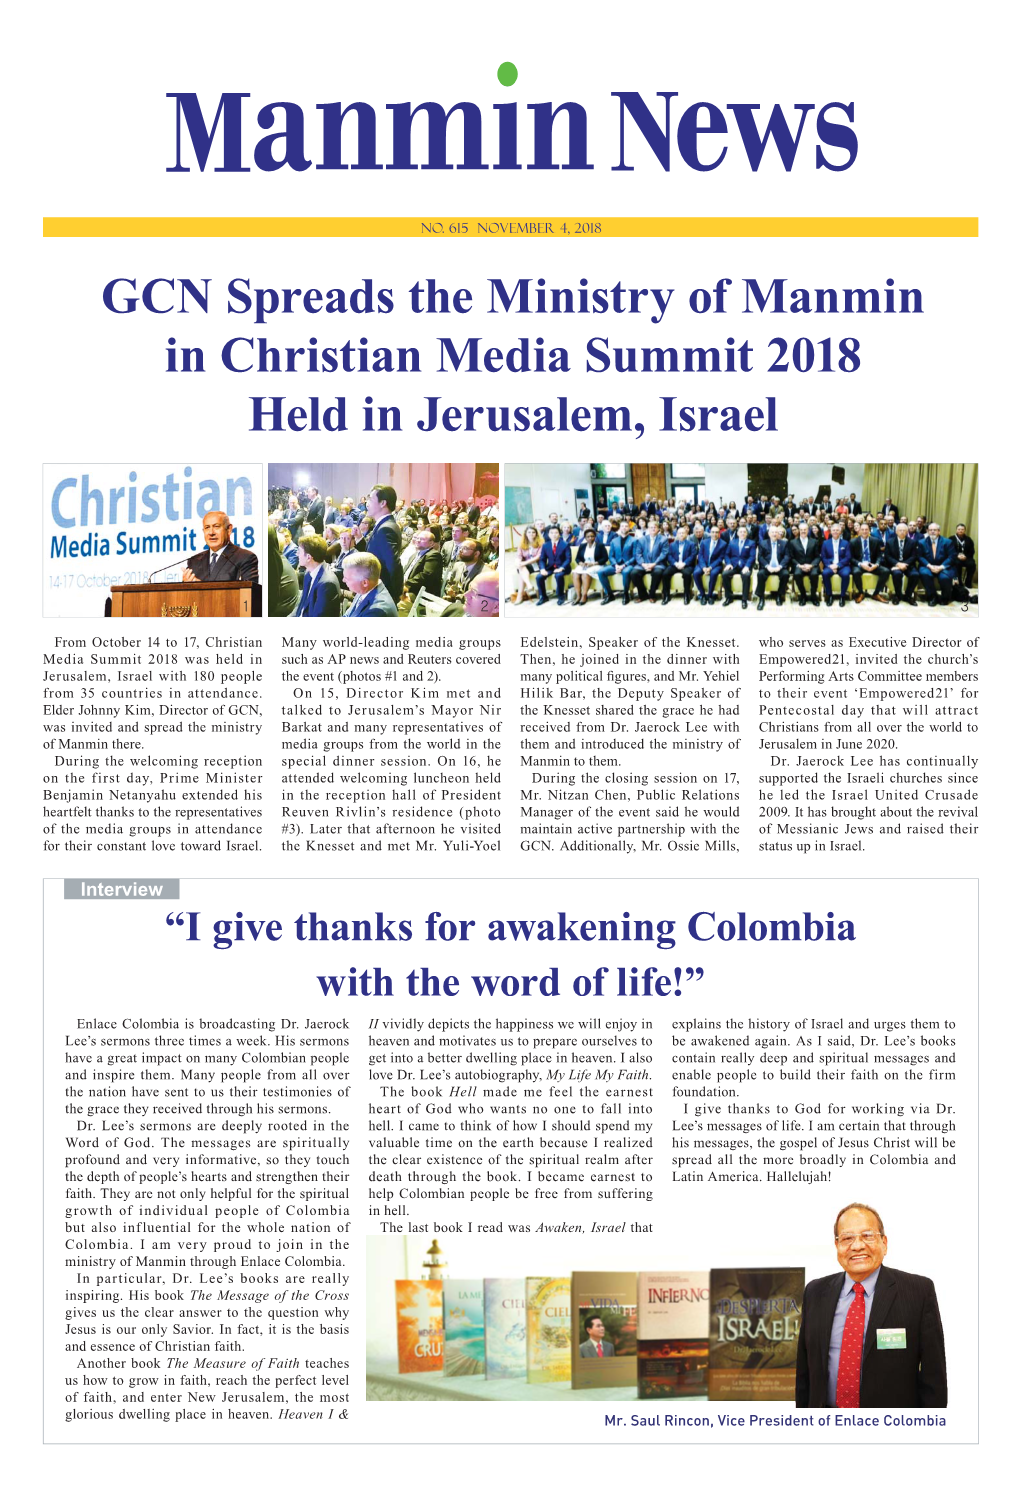 GCN Spreads the Ministry of Manmin in Christian Media Summit 2018 Held in Jerusalem, Israel